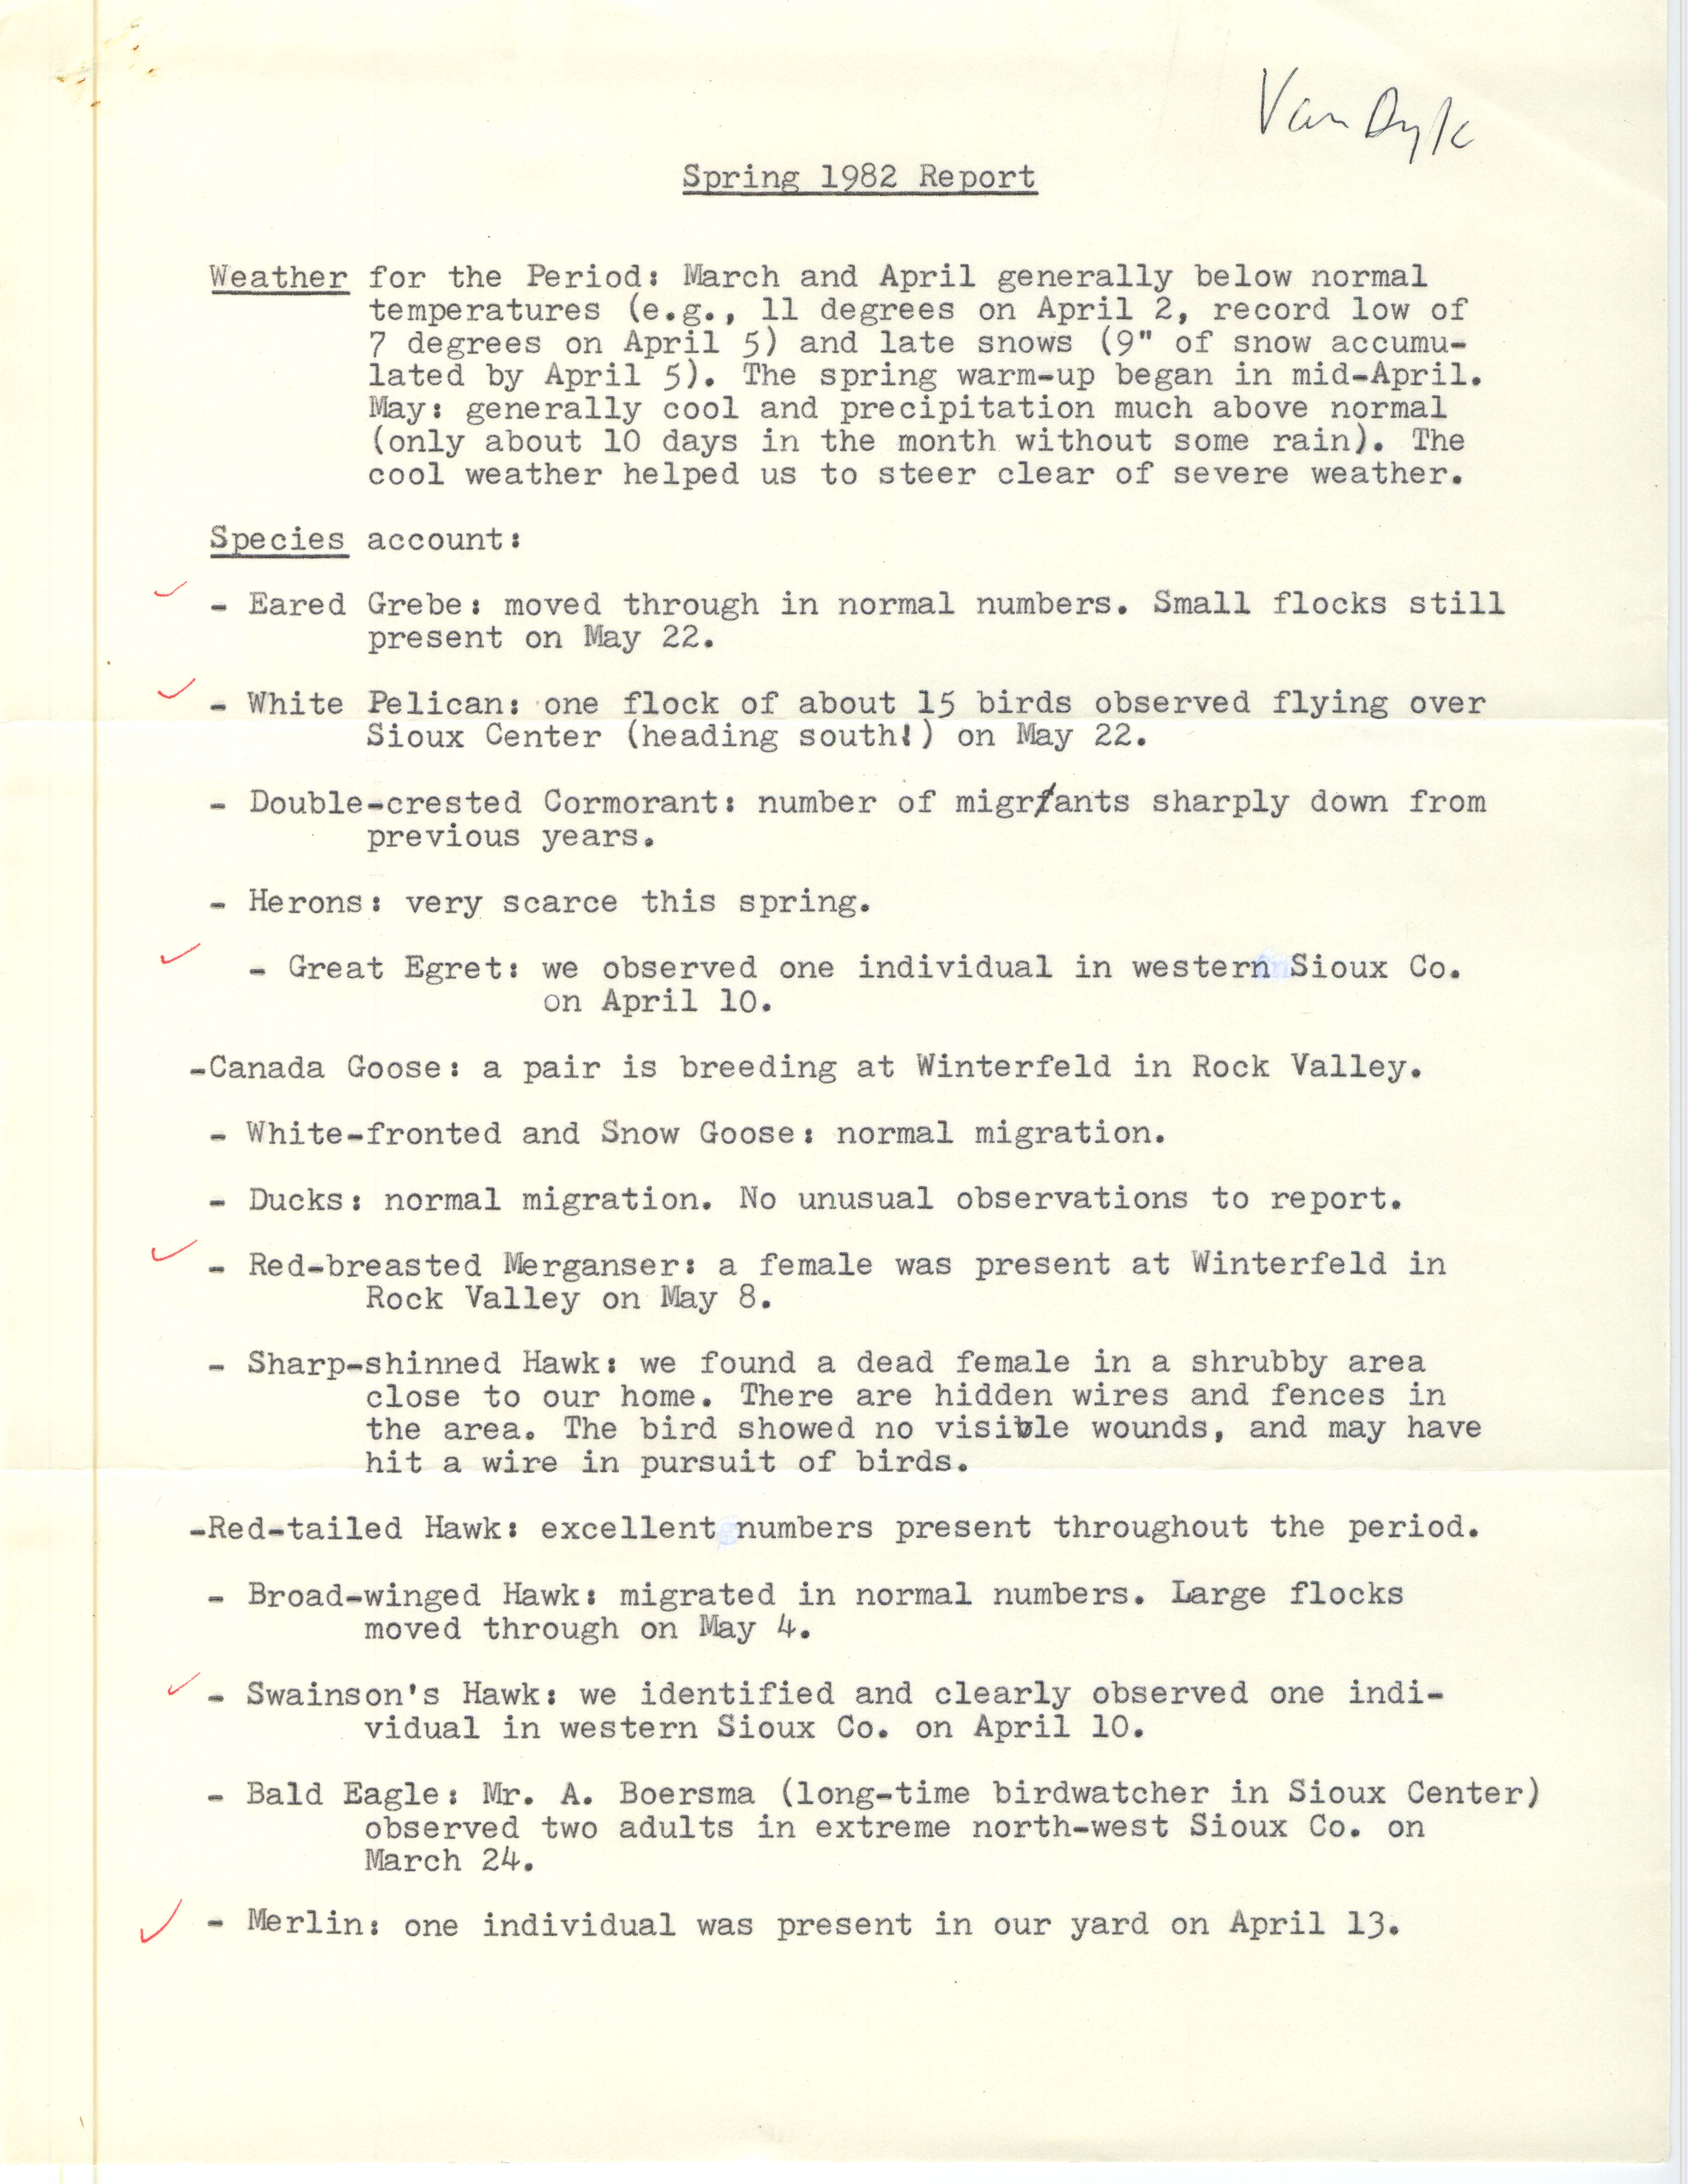 Field notes contributed by John Van Dyk, May 31, 1982